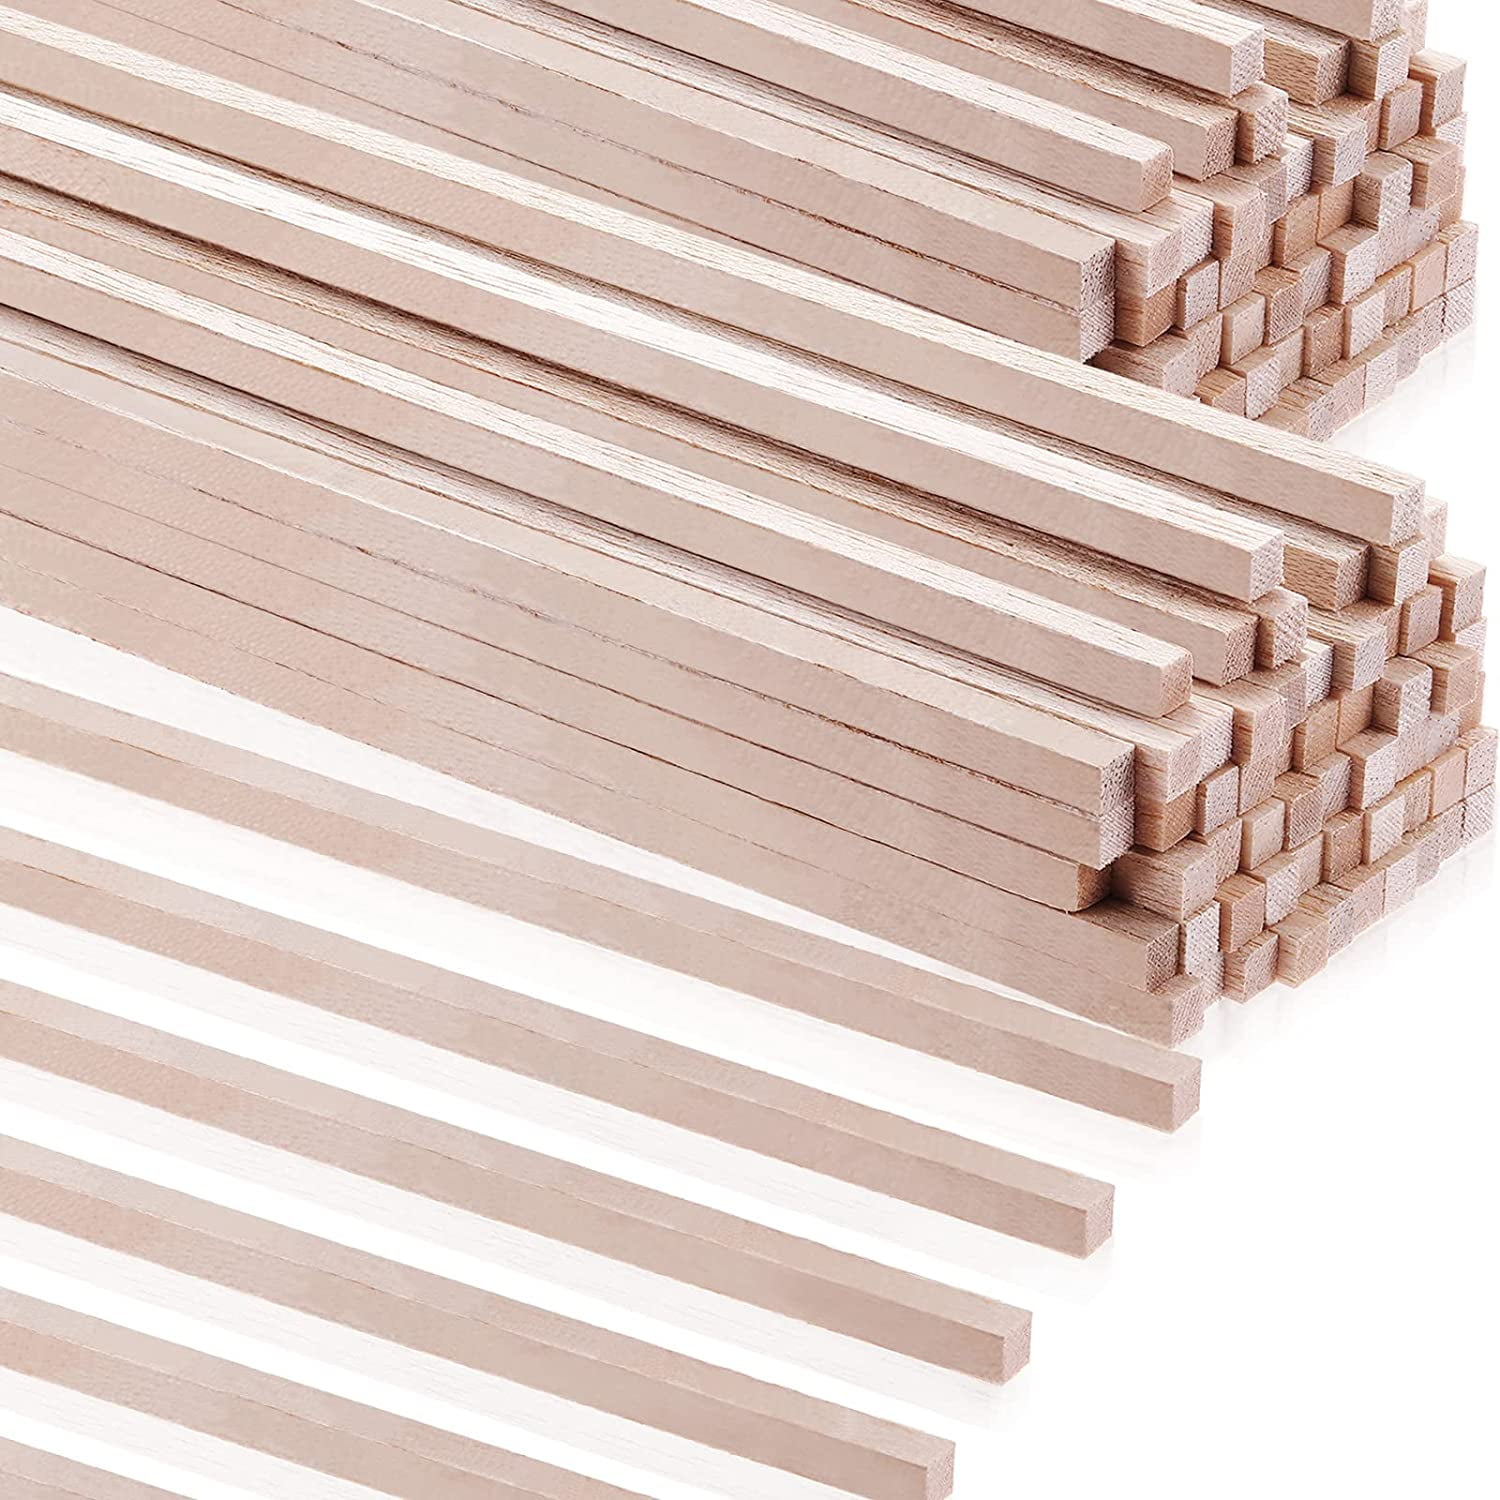 Balsa Wood Sticks 1/4 inch Square Dowels Strips 12 Long - Pack of 30 by Craftiff